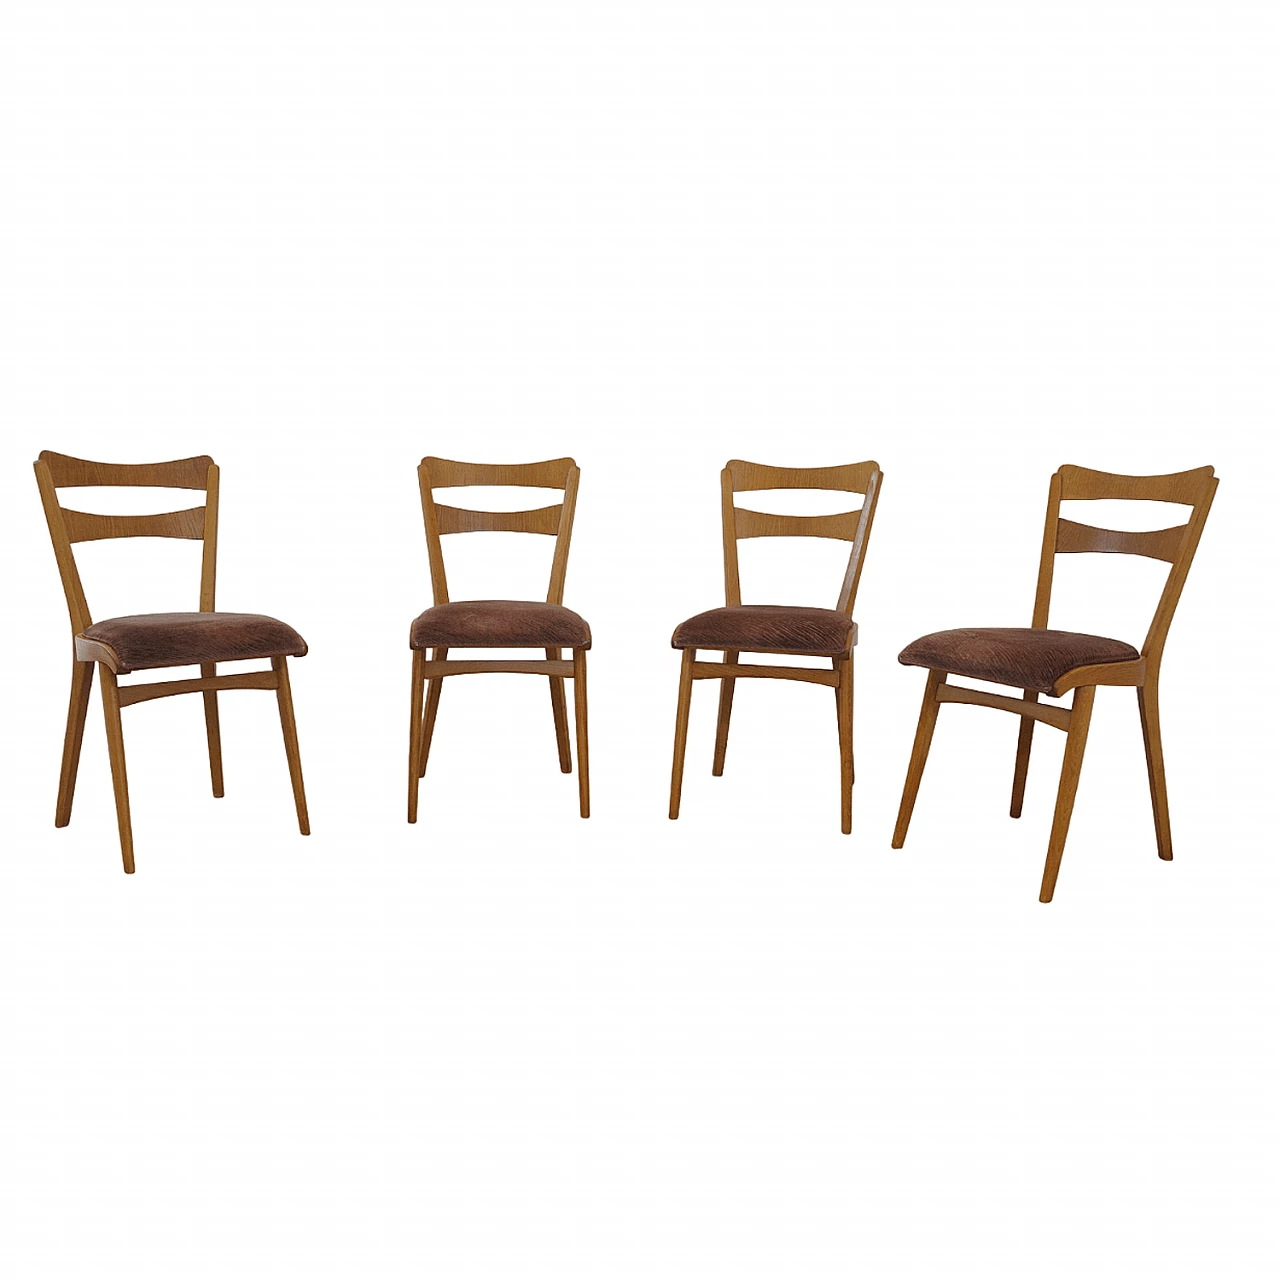 4 Chairs in beech and brown fabric by Tatra Nábytok, 1960s 25